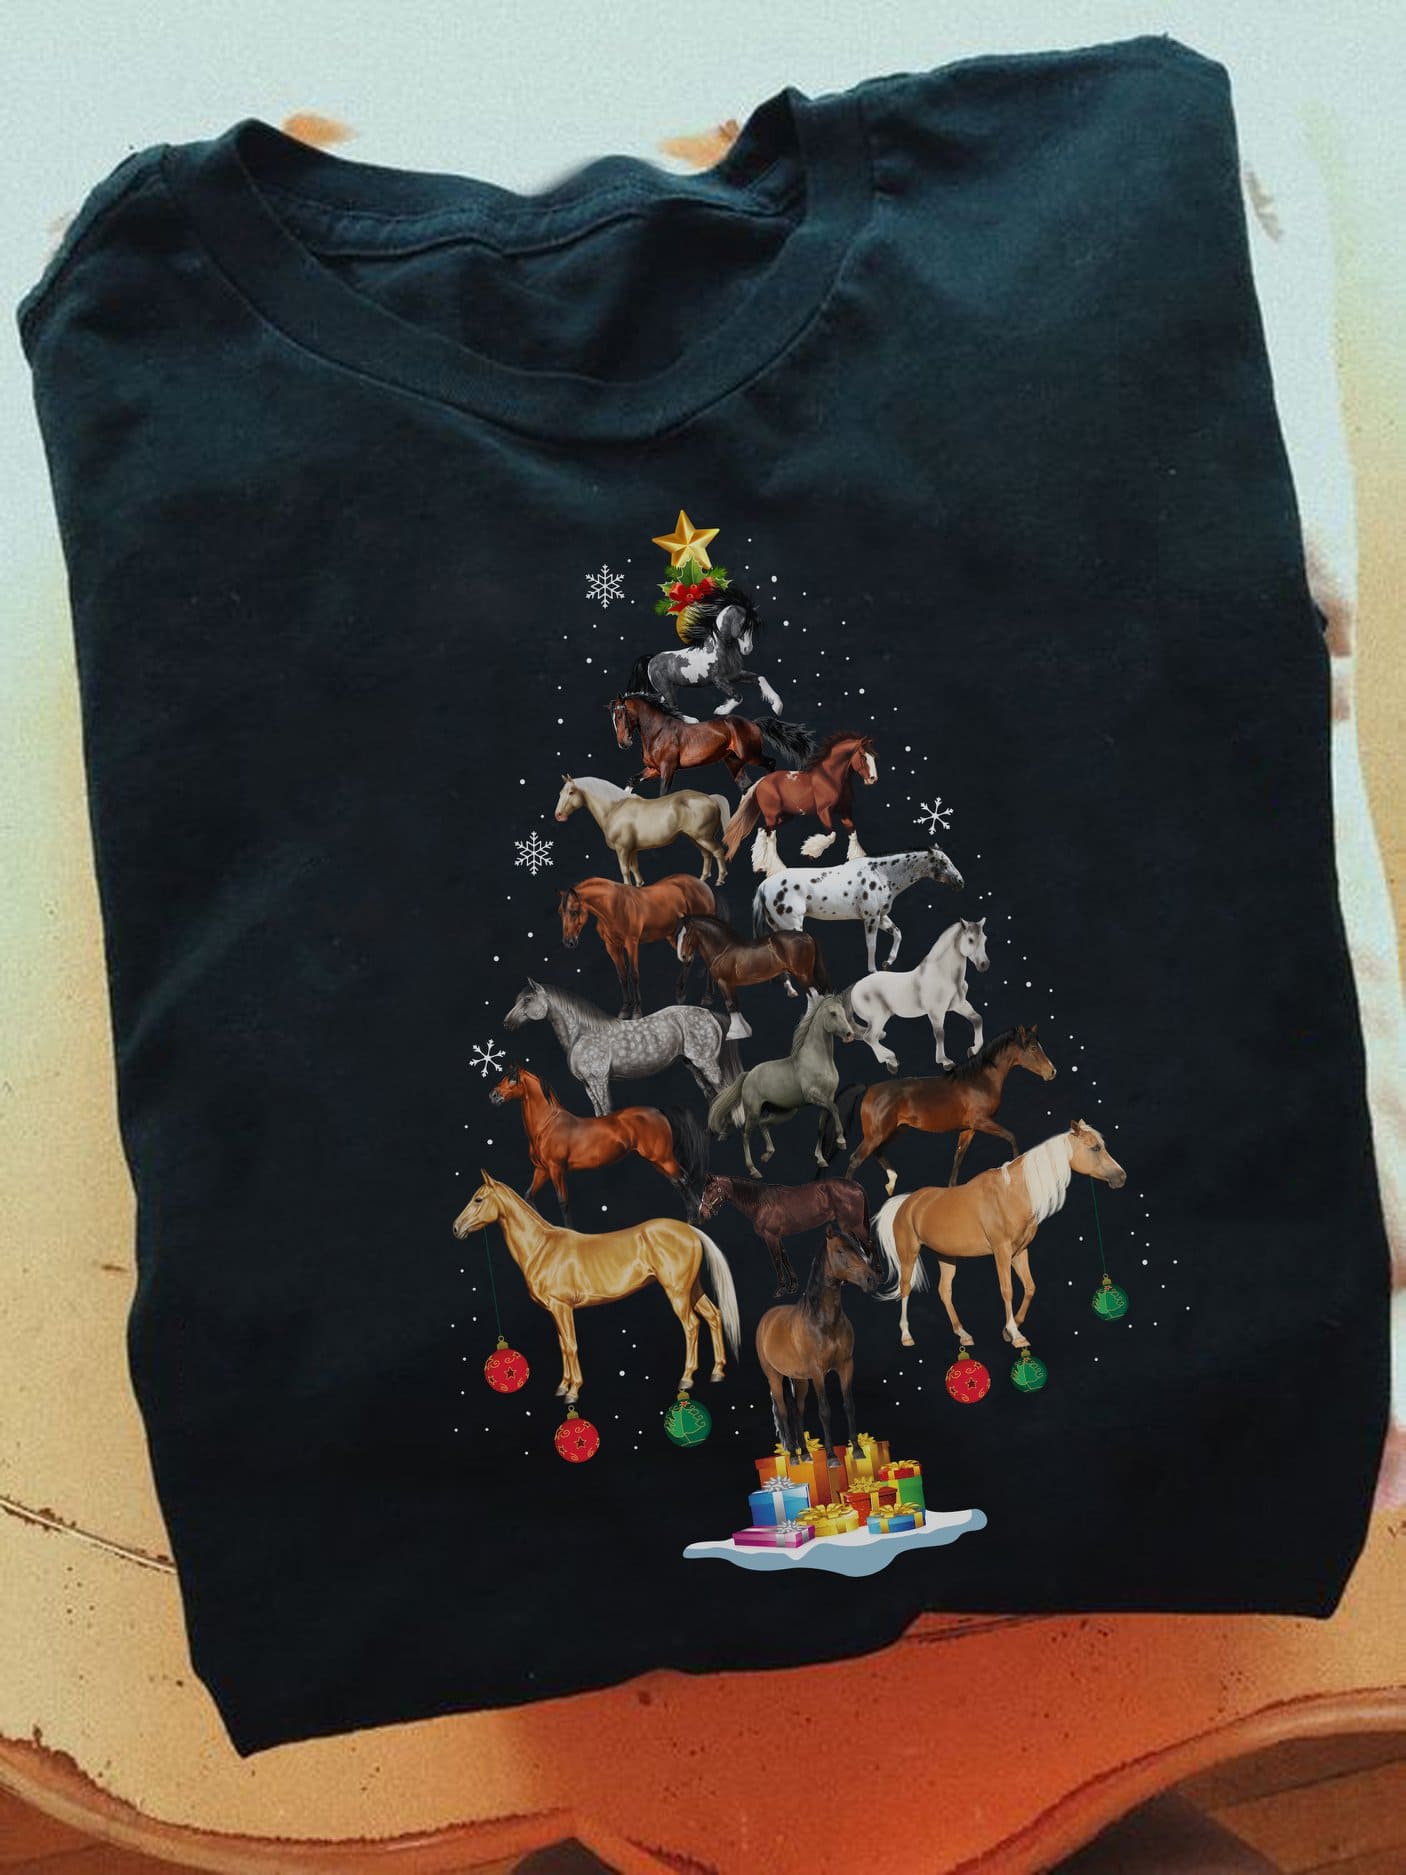 Horse Christmas tree - Have little merry Christmas, Christmas day with horses